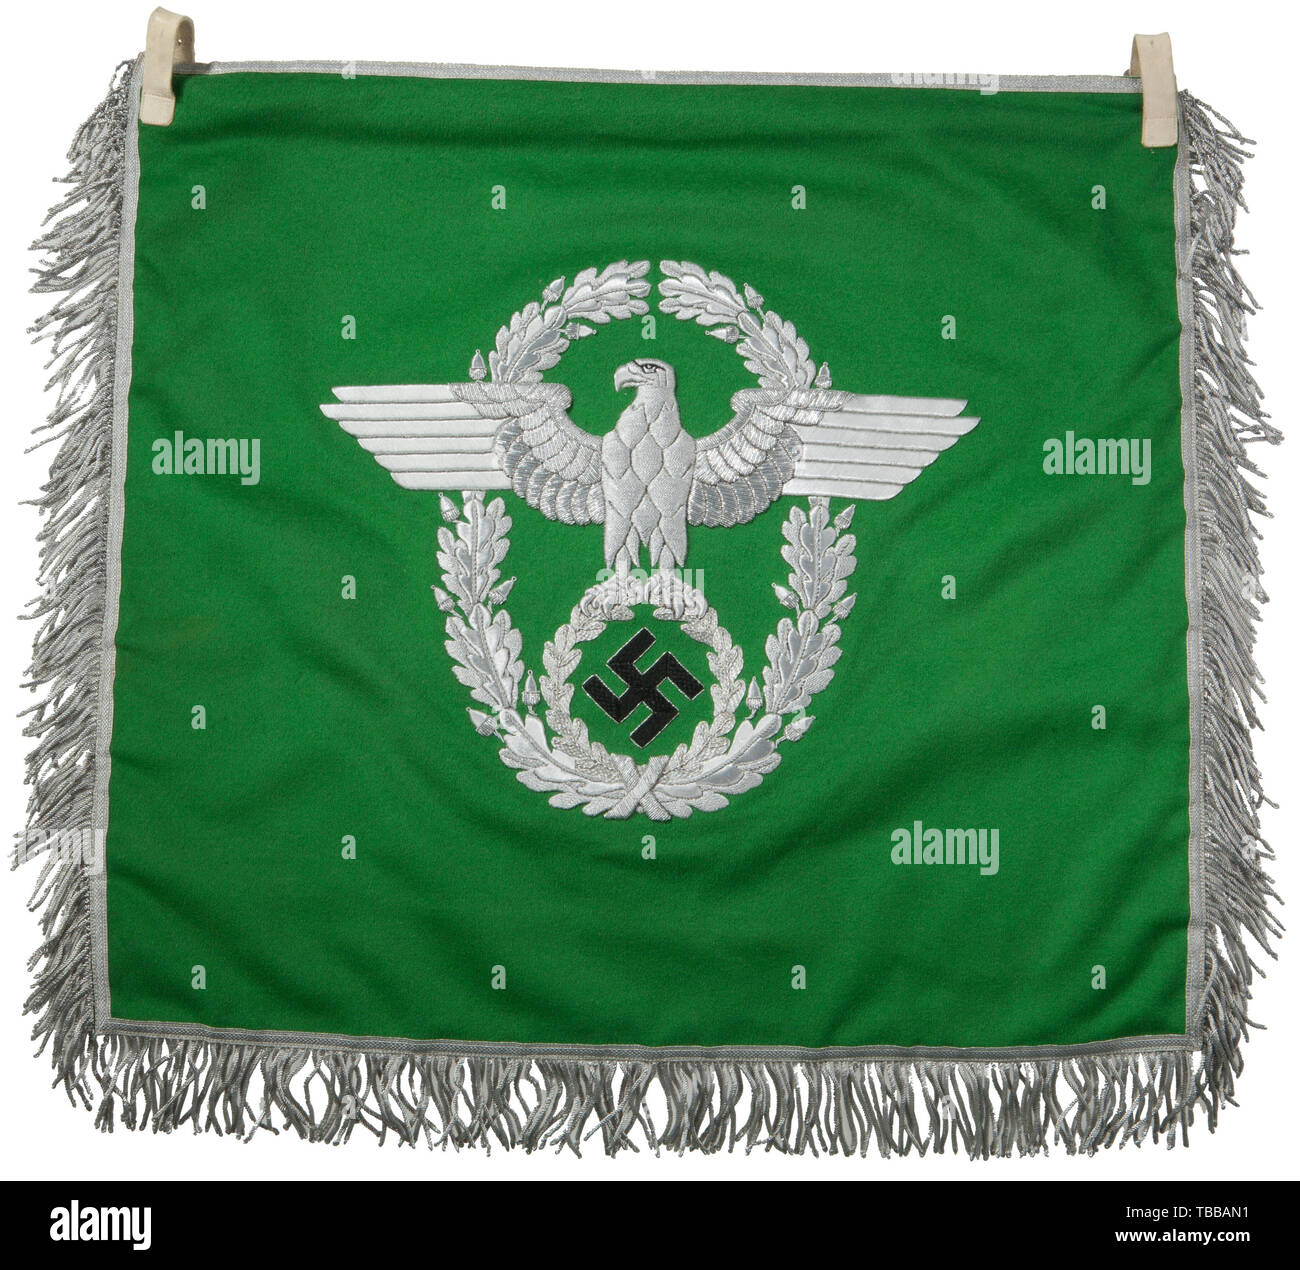 THE JOHN PEPERA COLLECTION, A Trumpet Banner of the Police, Double sided bright green doe skin wool with two 16 mm white leather attachment steel buckle straps. 8 mm flat silver bordering outer edge with 4.5 cm silver/aluminium wire fringe on three sides. Embroidered police eagle with outstretched wings, clutching a wreathed, canted woven black thread swastika in its talons, encompassed by a vertically oval, oakleaf wreath in silver/aluminium metal thread. Dimensions 44.5 x 47 cm (without fringe). Superb quality., Editorial-Use-Only Stock Photo